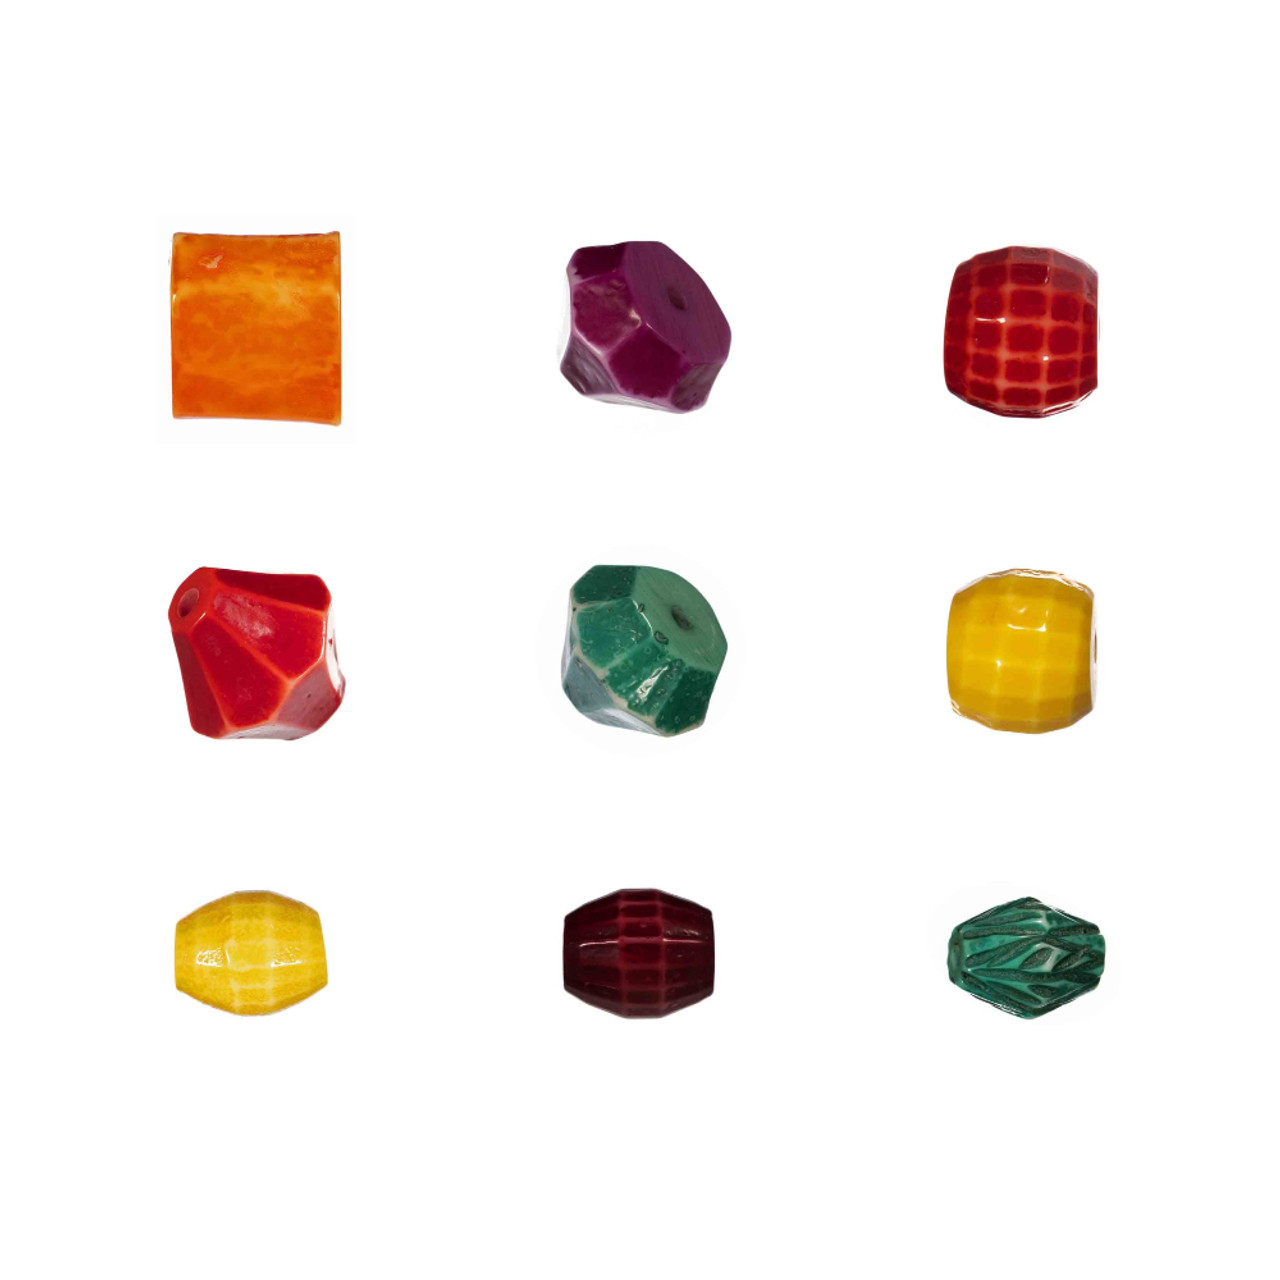 Craft County Textured Ball Beads Multiple Colors & Packs Beadwork, Macrame, Jewelry Various Sizes for Bead, Size: 5 Pack, Orange